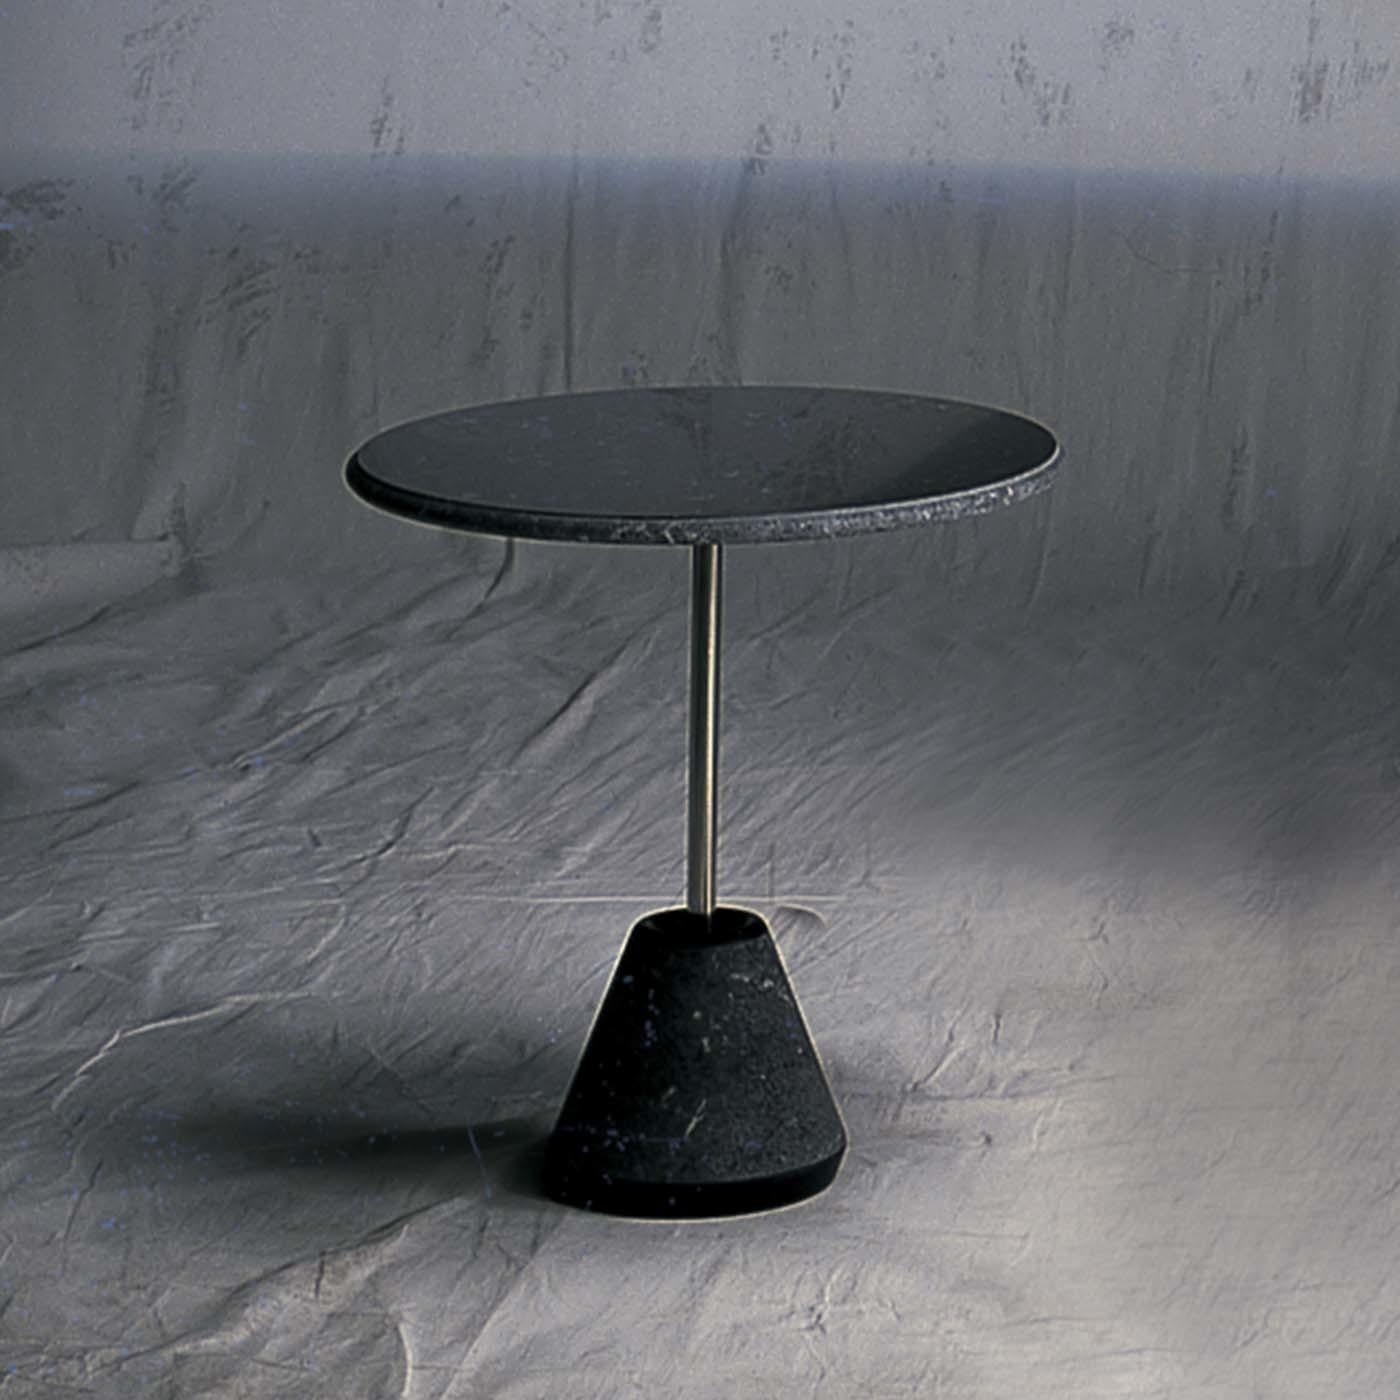 The Ipaz collection by Achille Castiglioni for UpGroup features tables that are a decorative furniture complements, easy and versatile, designed with an elegant and refined shape. The cylindrical base is made of black Marquina marble with a